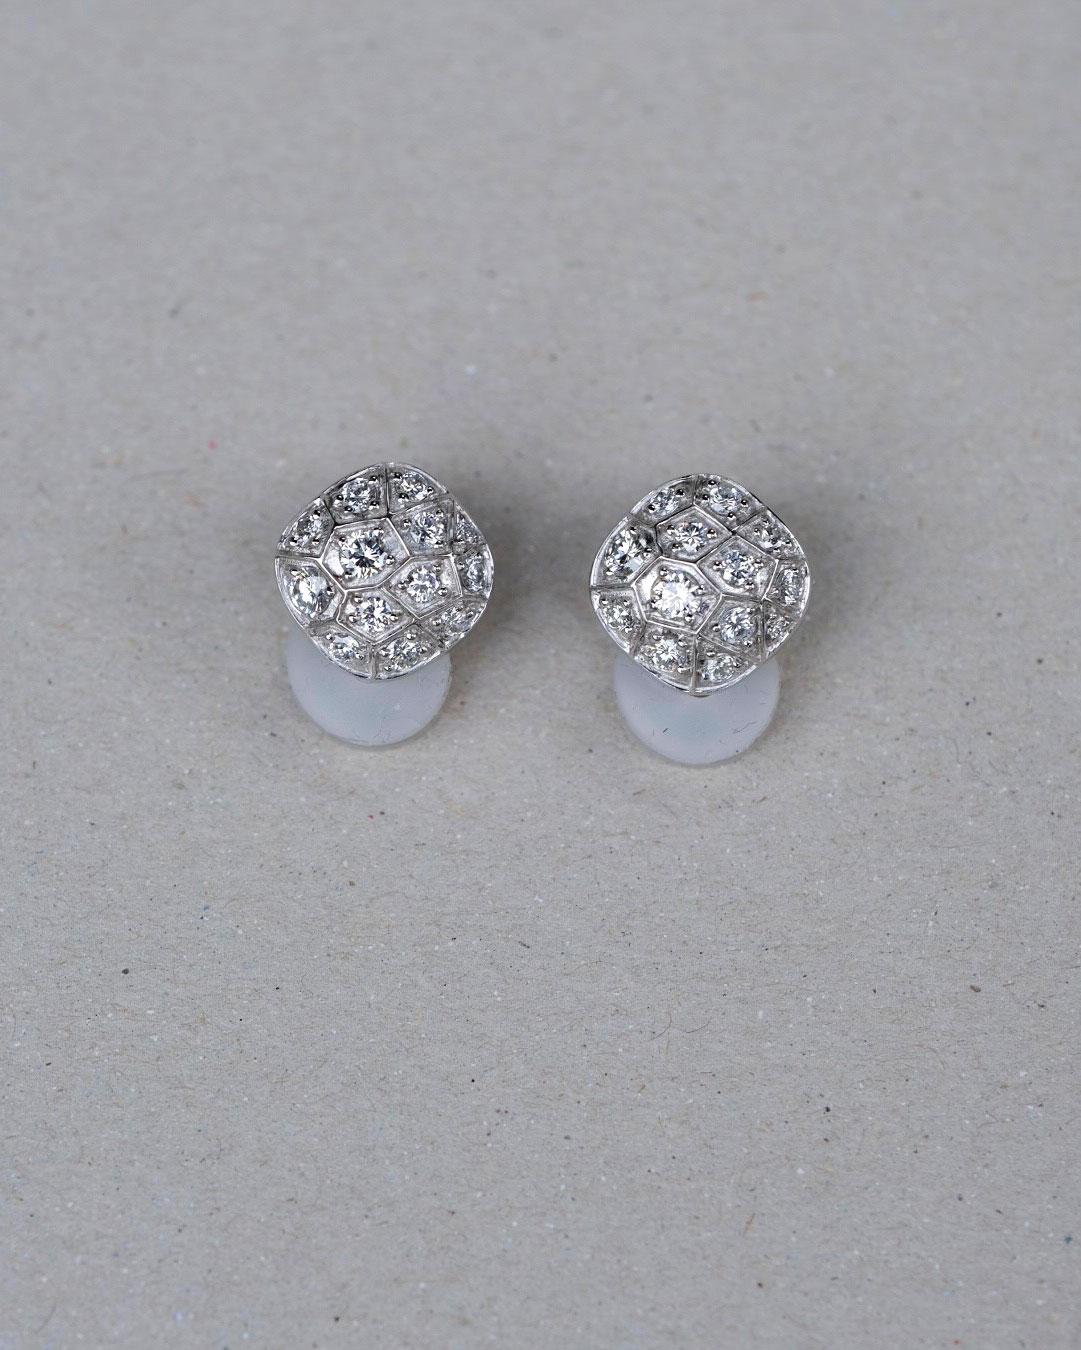 Earrings in White Gold with 26 Diamonds, 1, 56ct.. For Sale 3